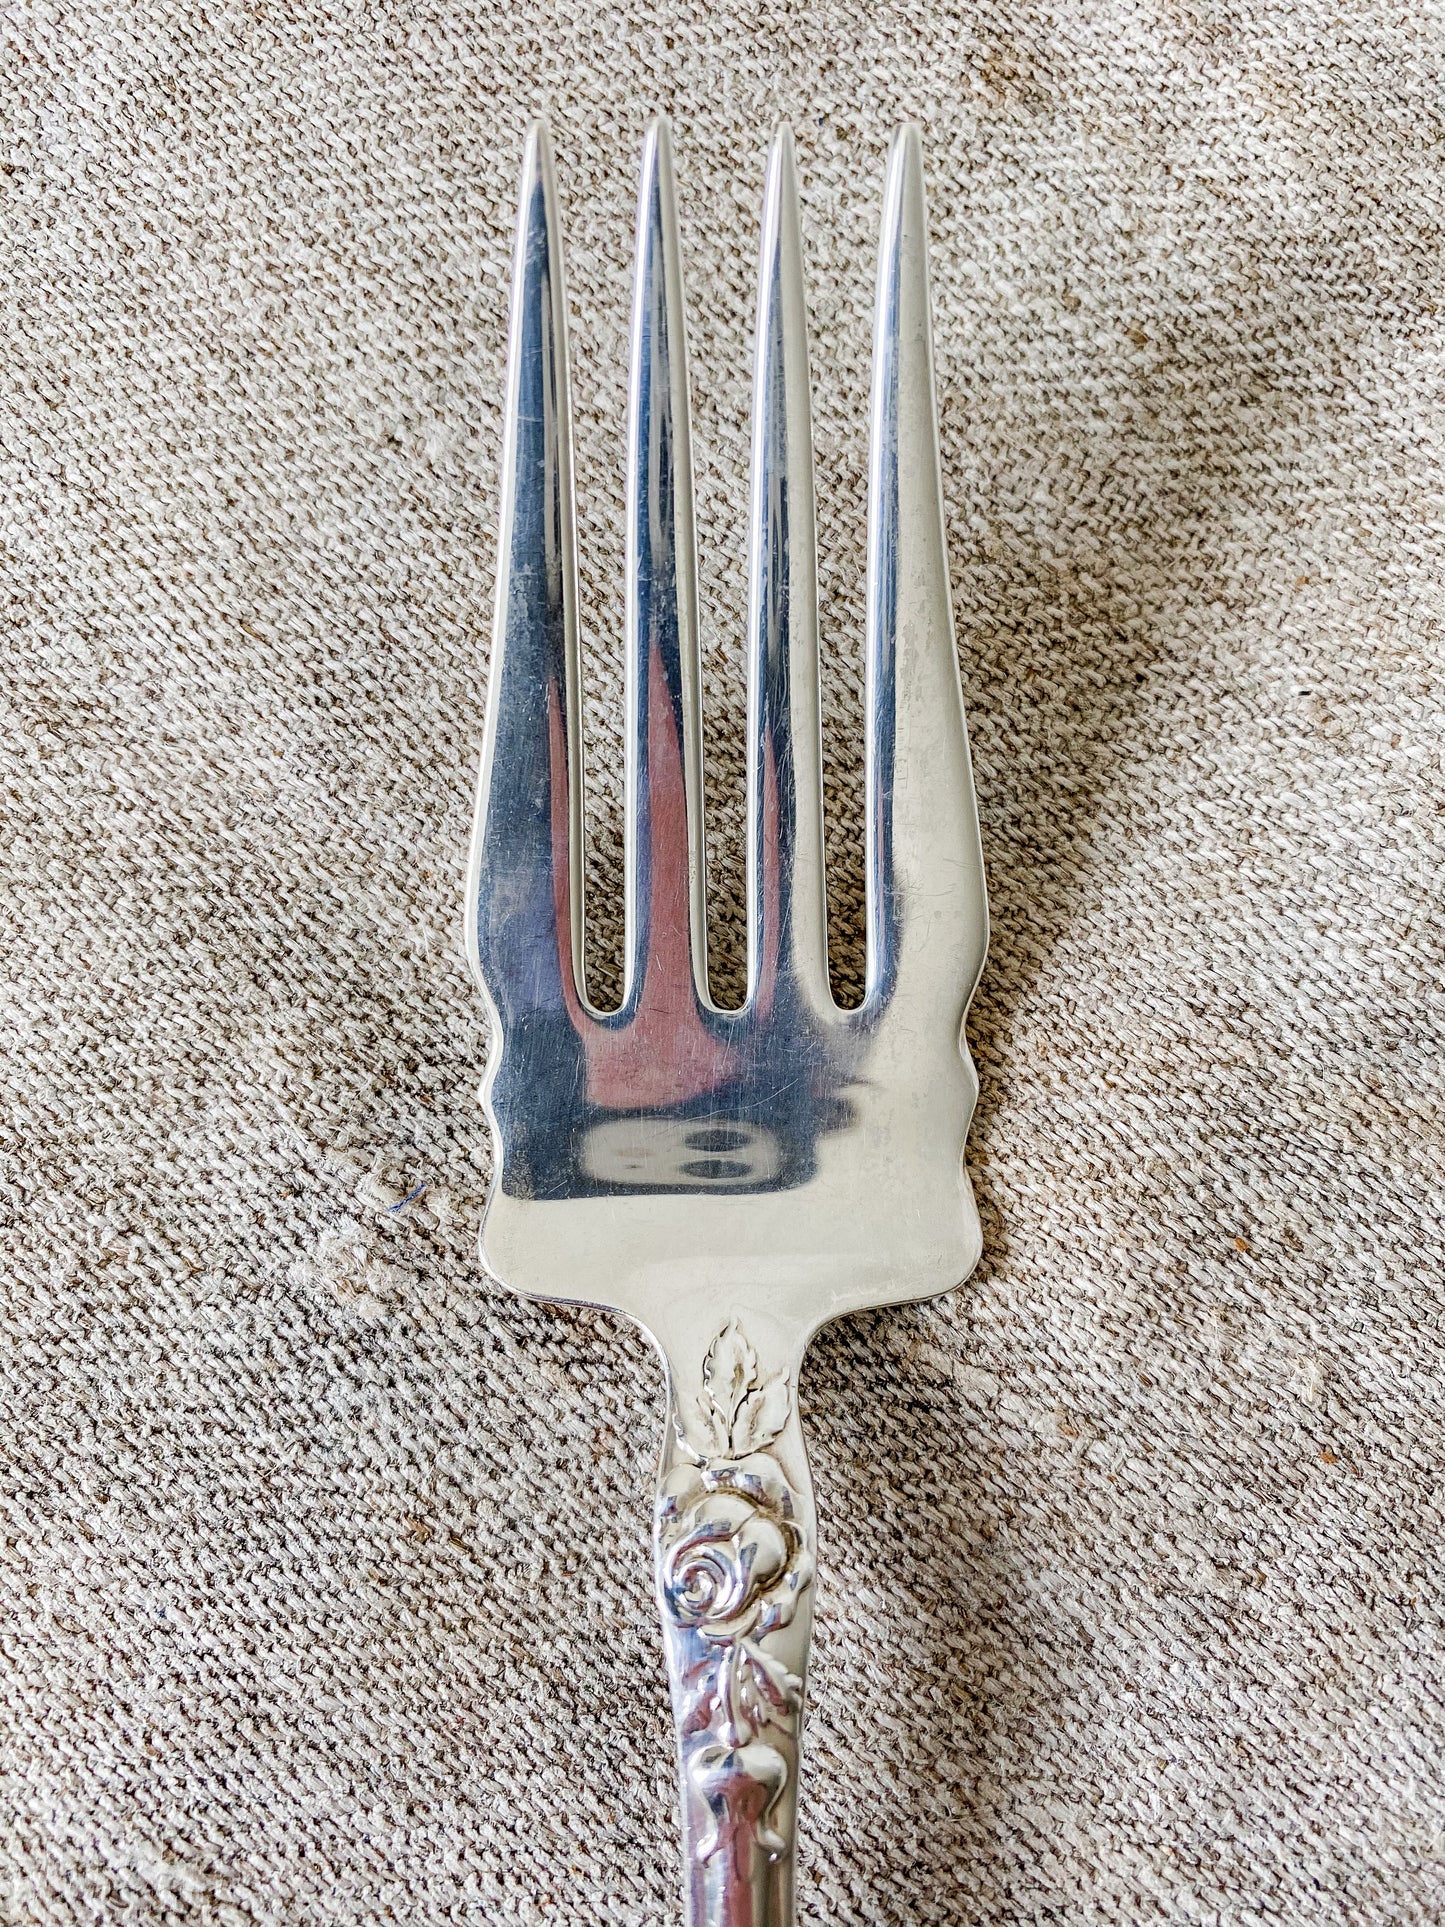 Vintage Sterling Silver Cold Meat Fork | Normandy Rose by Northumbria